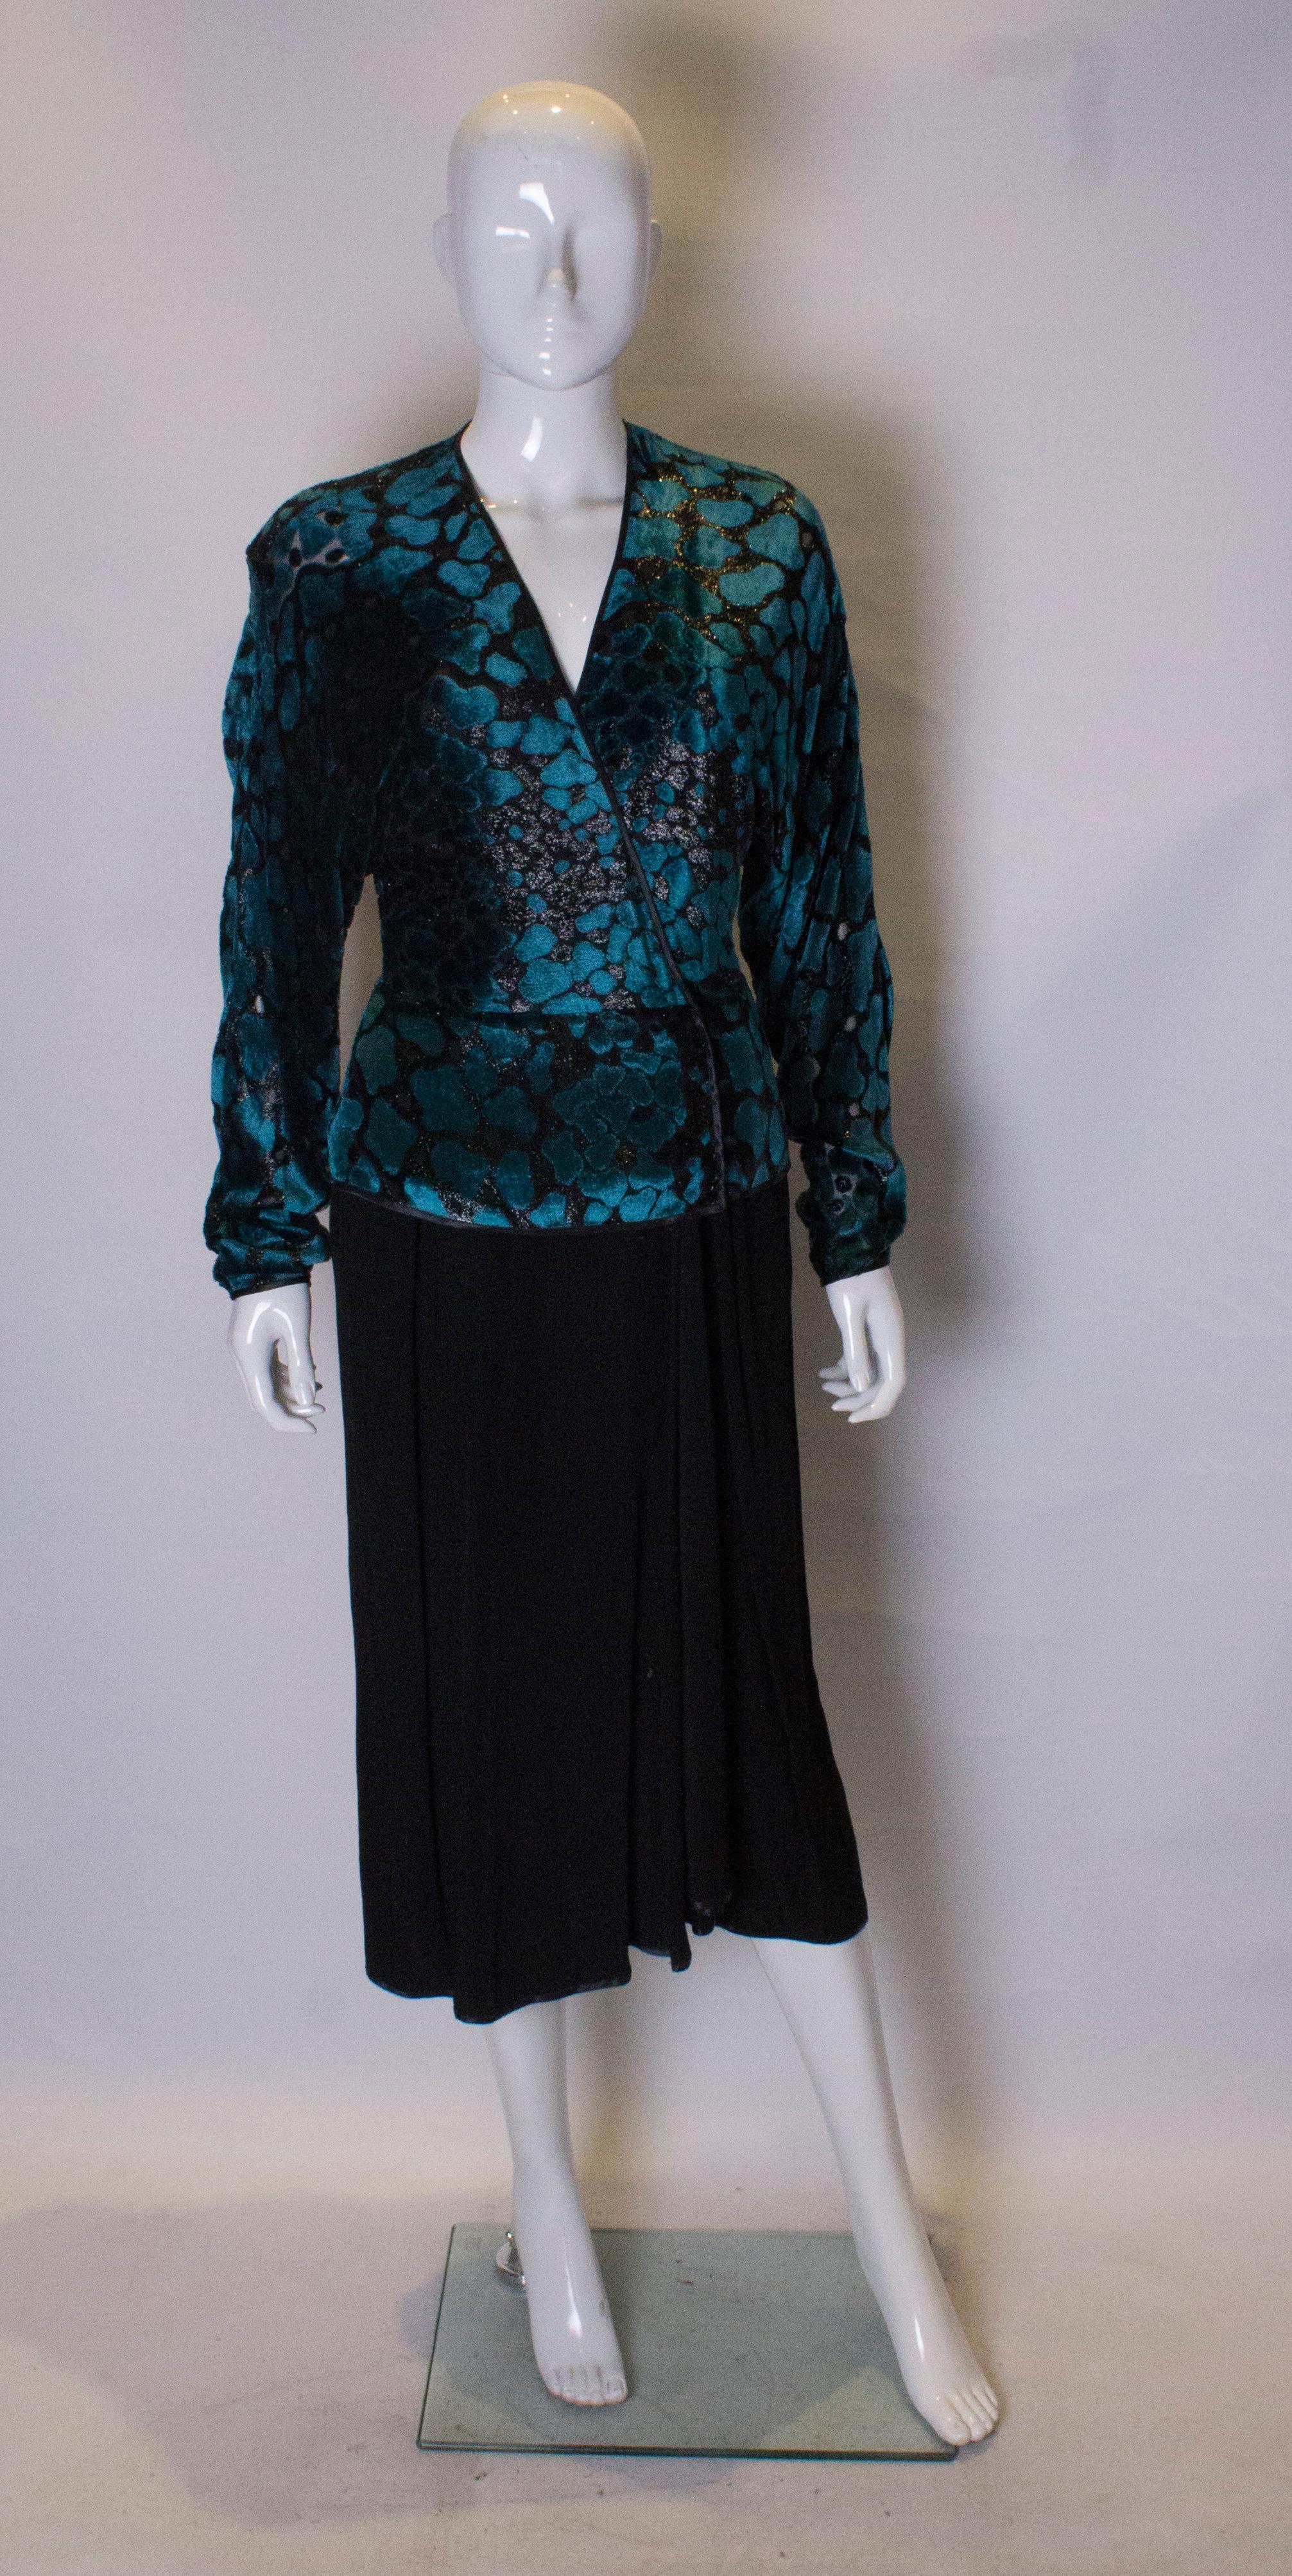 A chic and easy to wear cocktail dress by  UK designer Janice Wainwright.The dress has a turquoise and black devoree velvet top with the a black skirt. It has a V neckline, with a front button opening, and folds over with a slight peplum. The